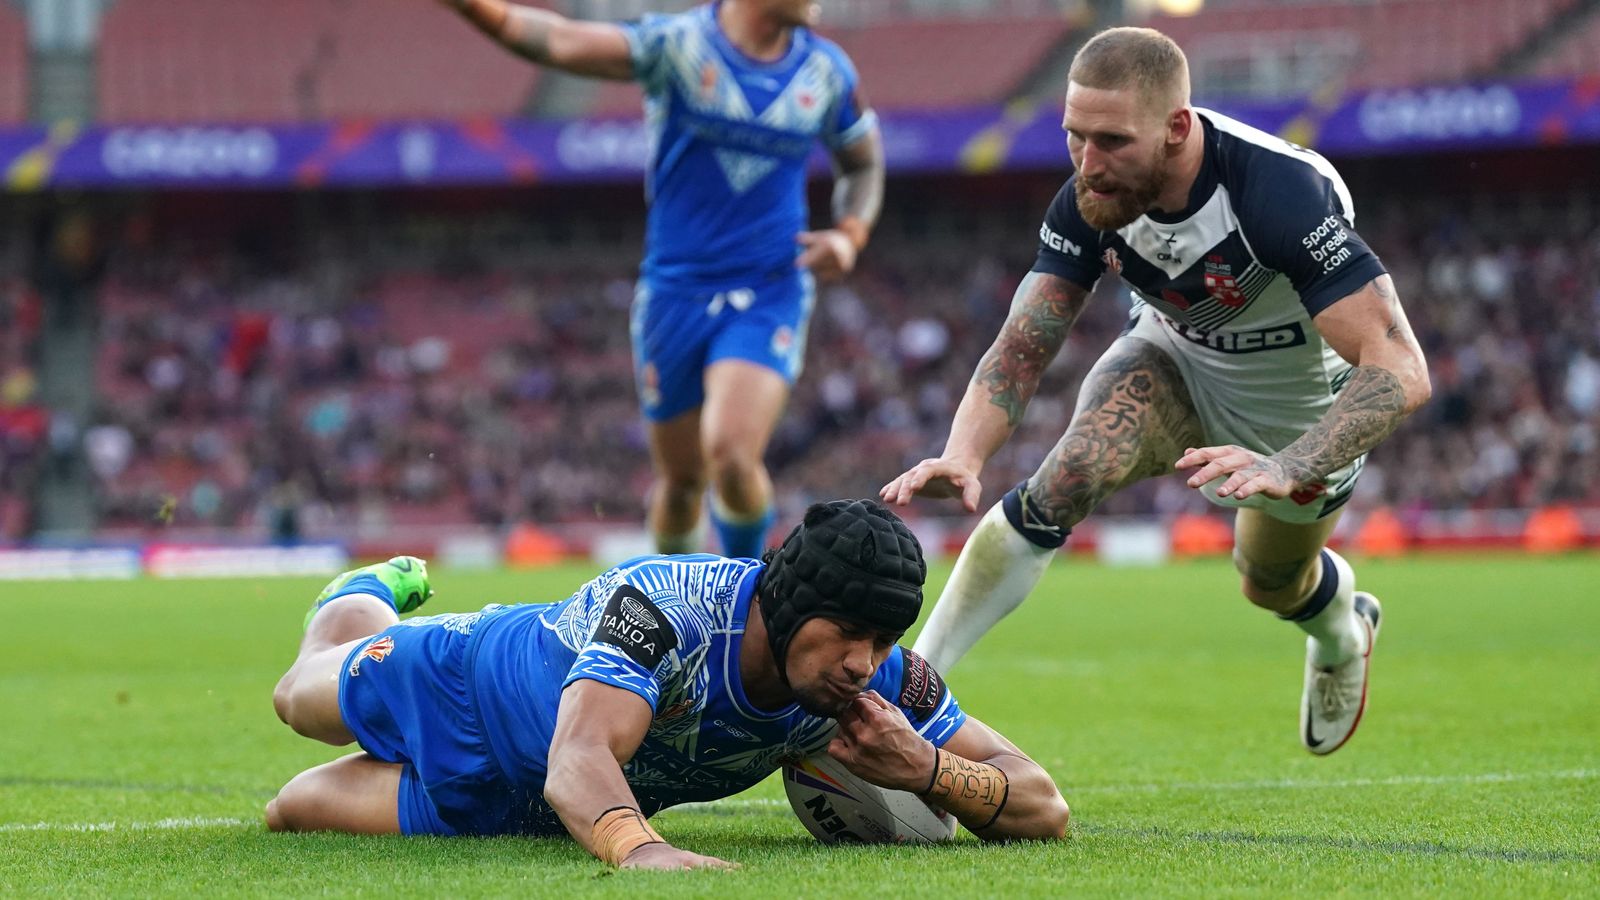 Rugby League World Cup: Stephen Crichton stuns England and sends Samoa into historic first final